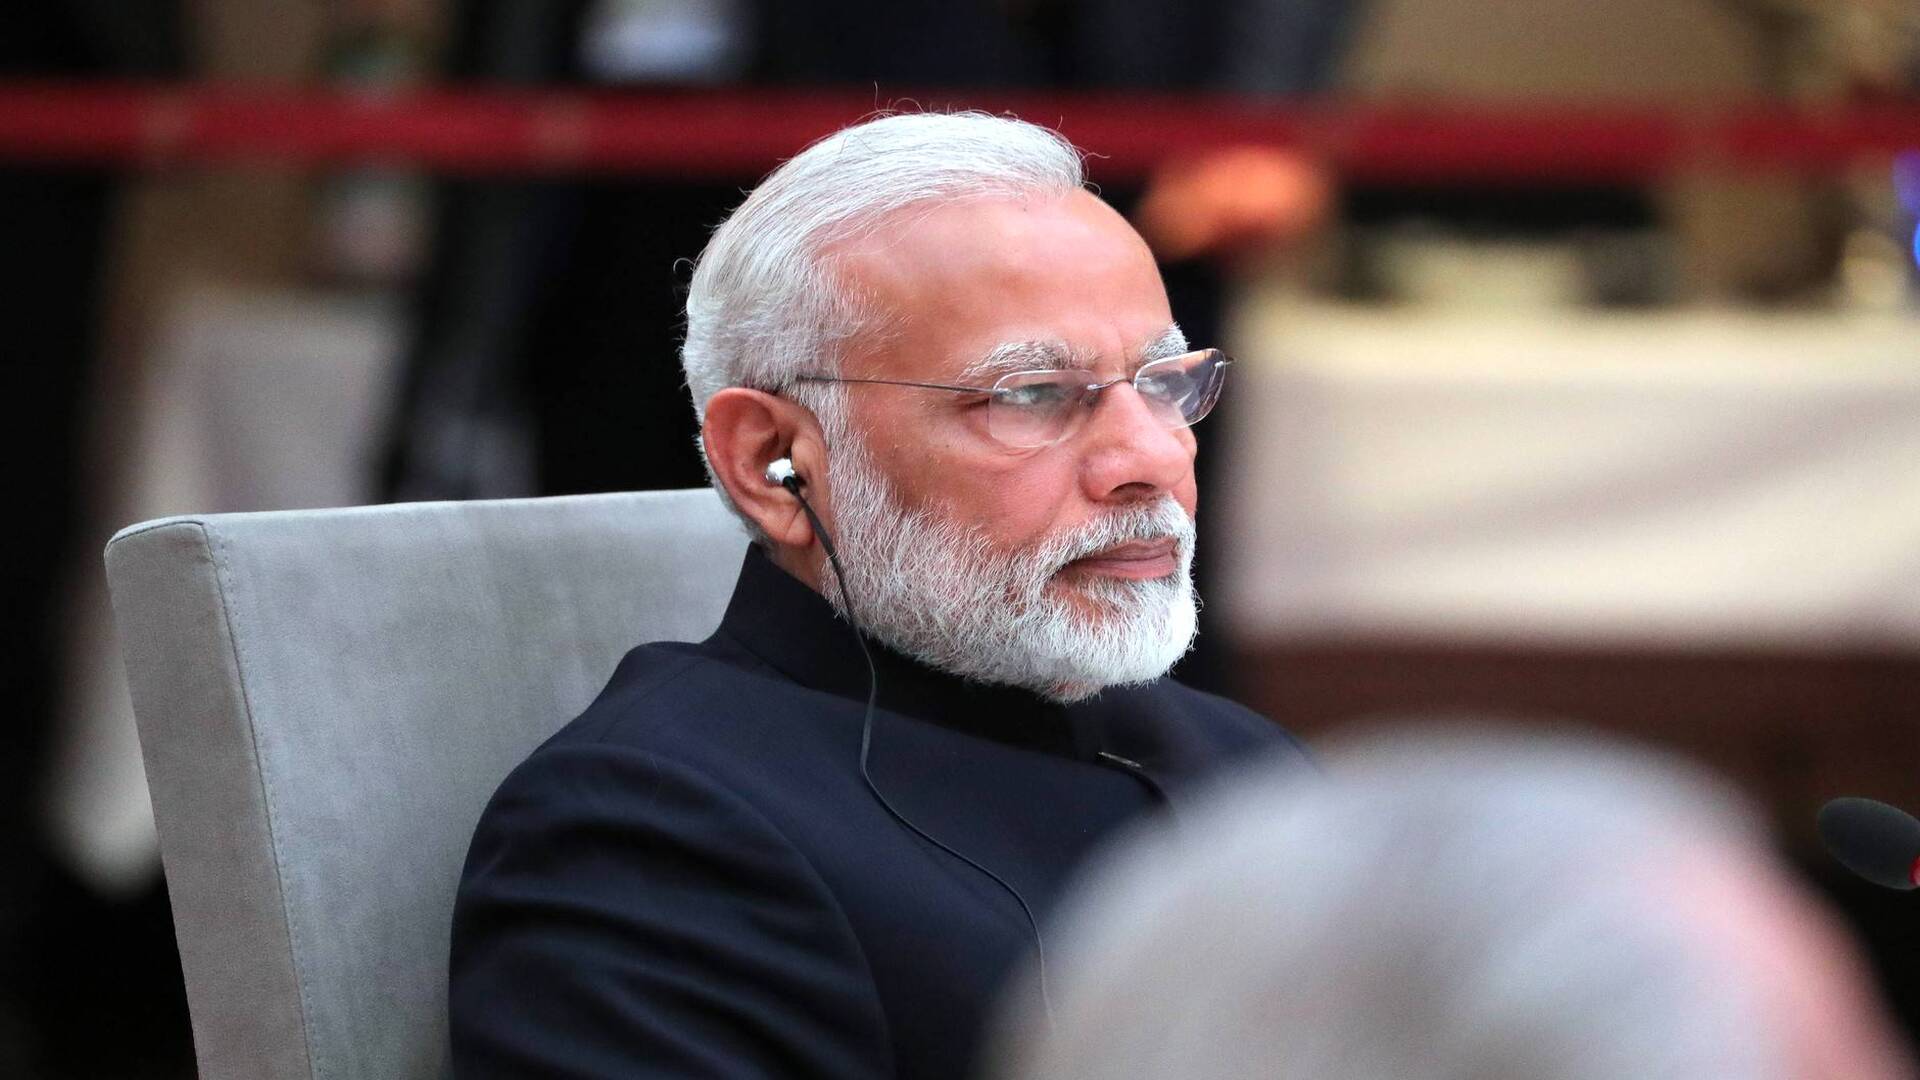 PM Modi to reply on ‘Motion of Thanks’ in Rajya Sabha today